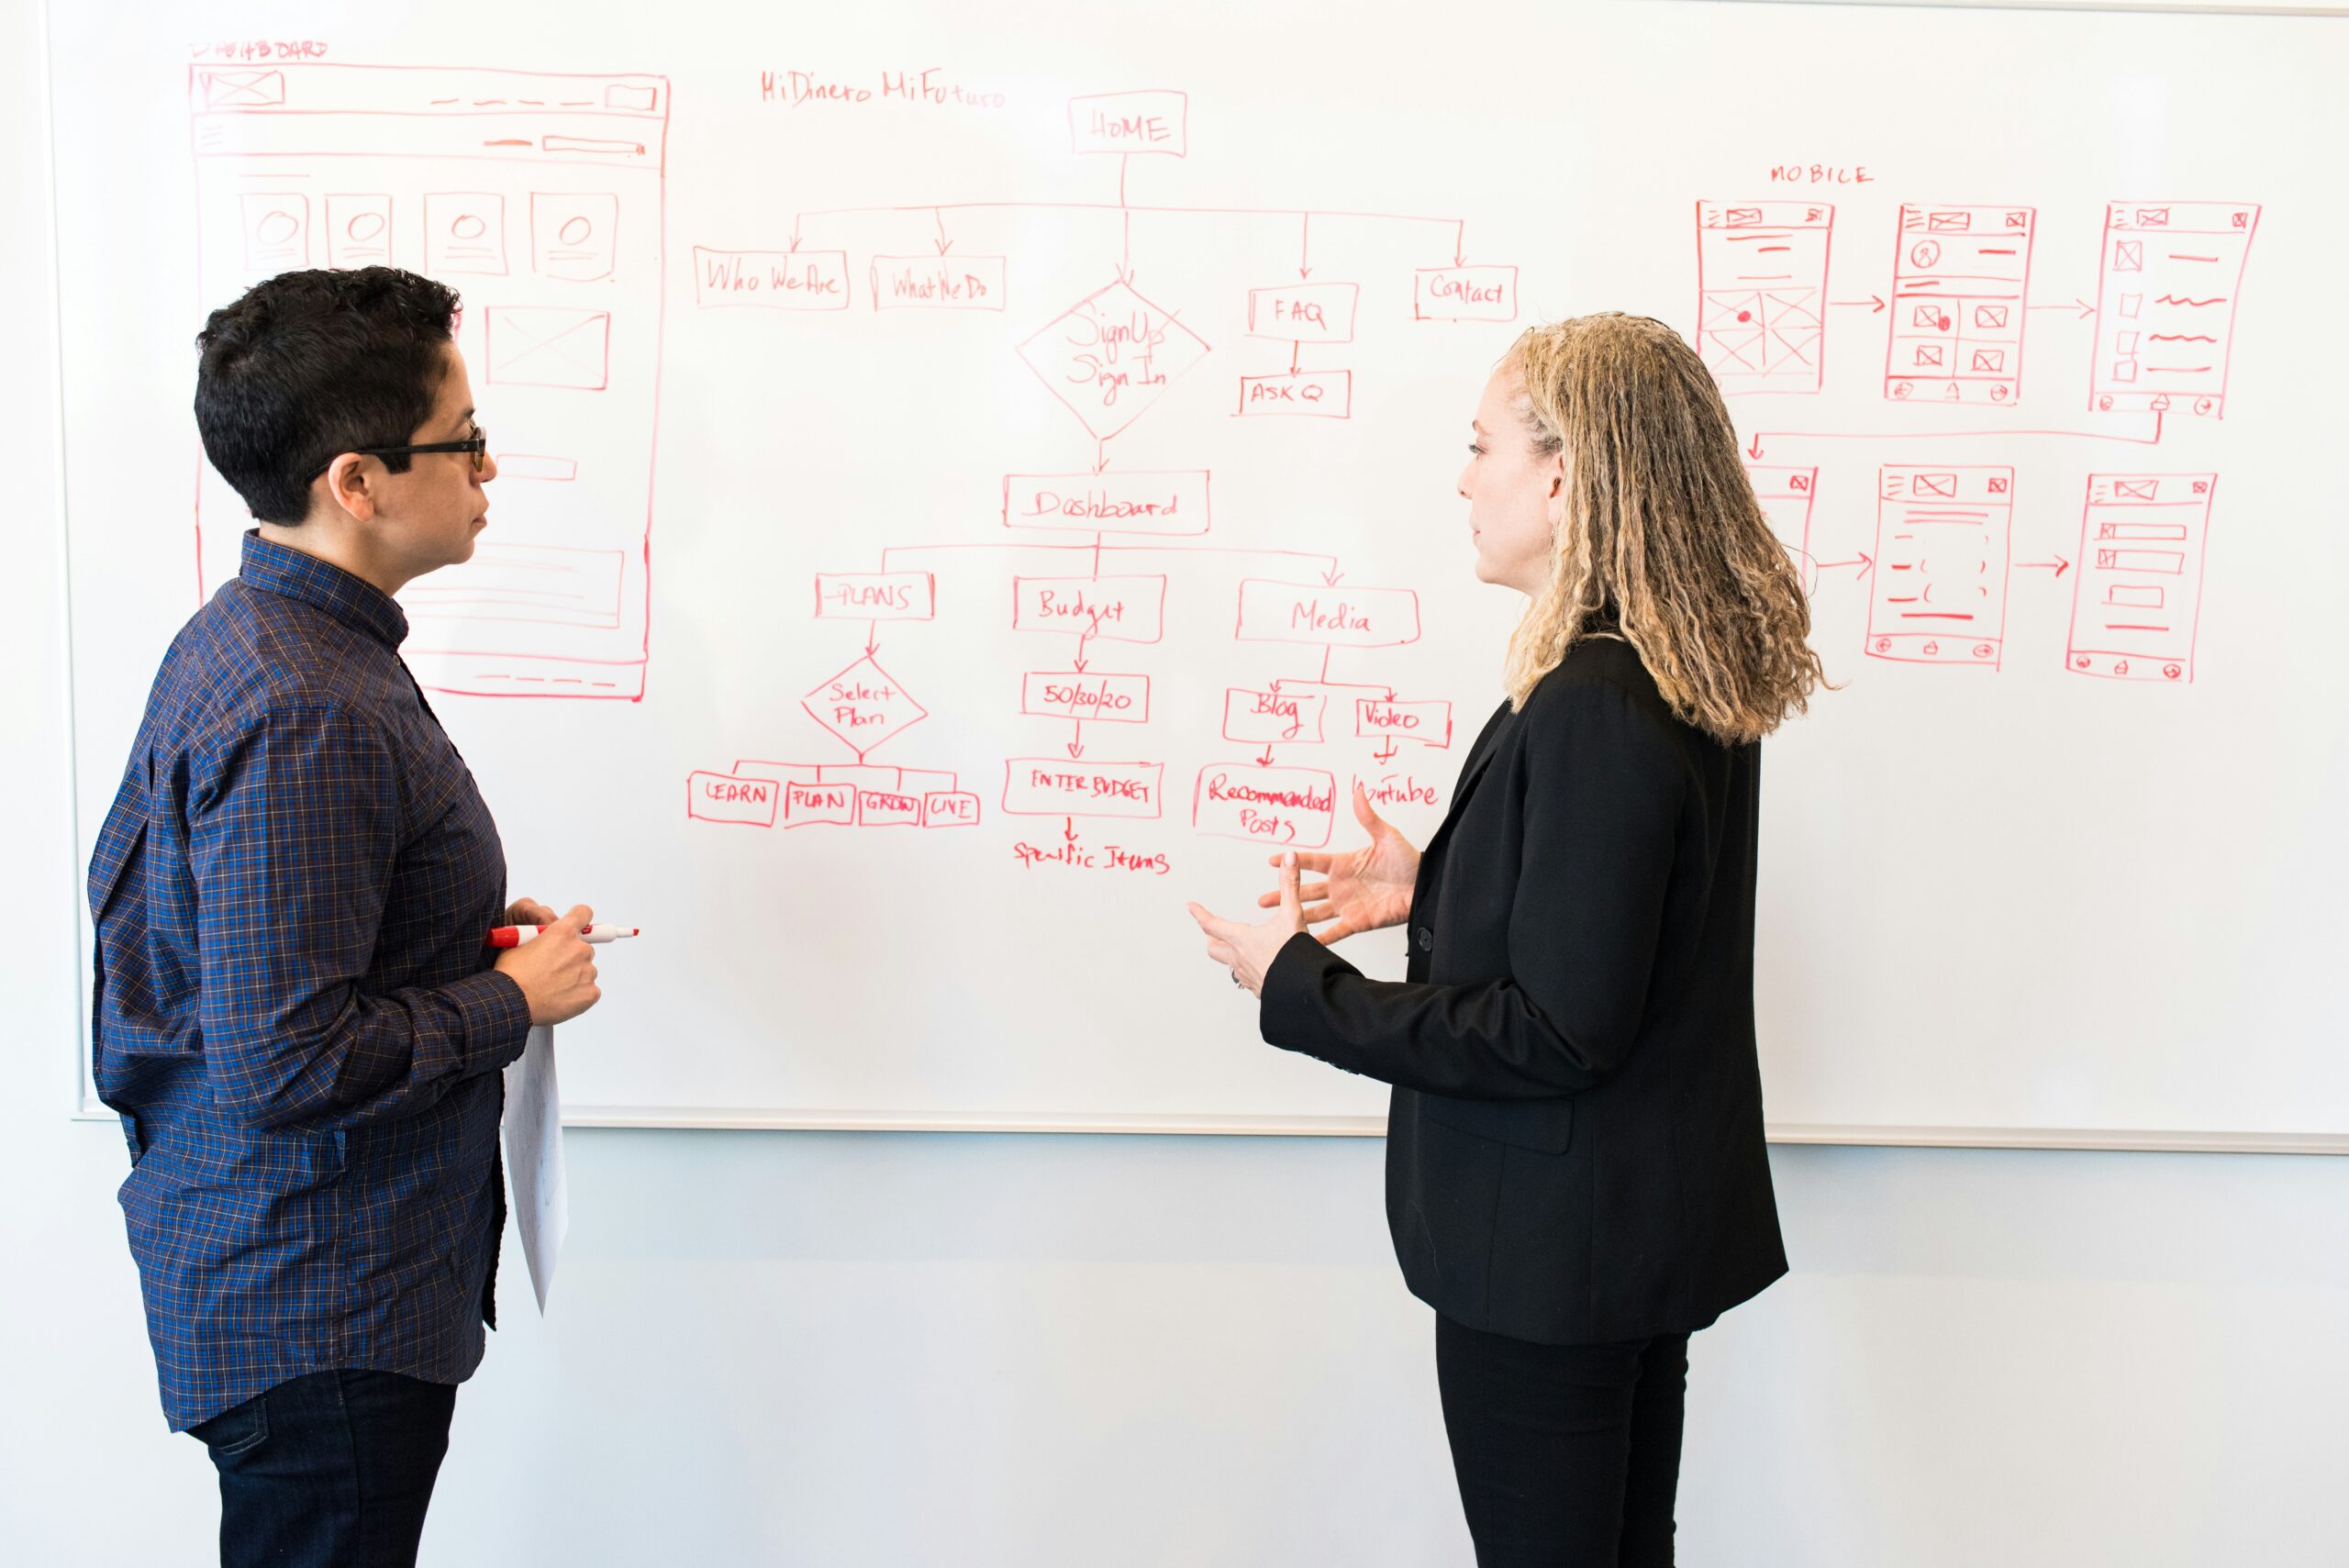 Two people stand in front of a whiteboard discussing a flowchart and wireframe sketches, both of which are drawn in red marker, discussing what is an example of a BPA implementation in action.